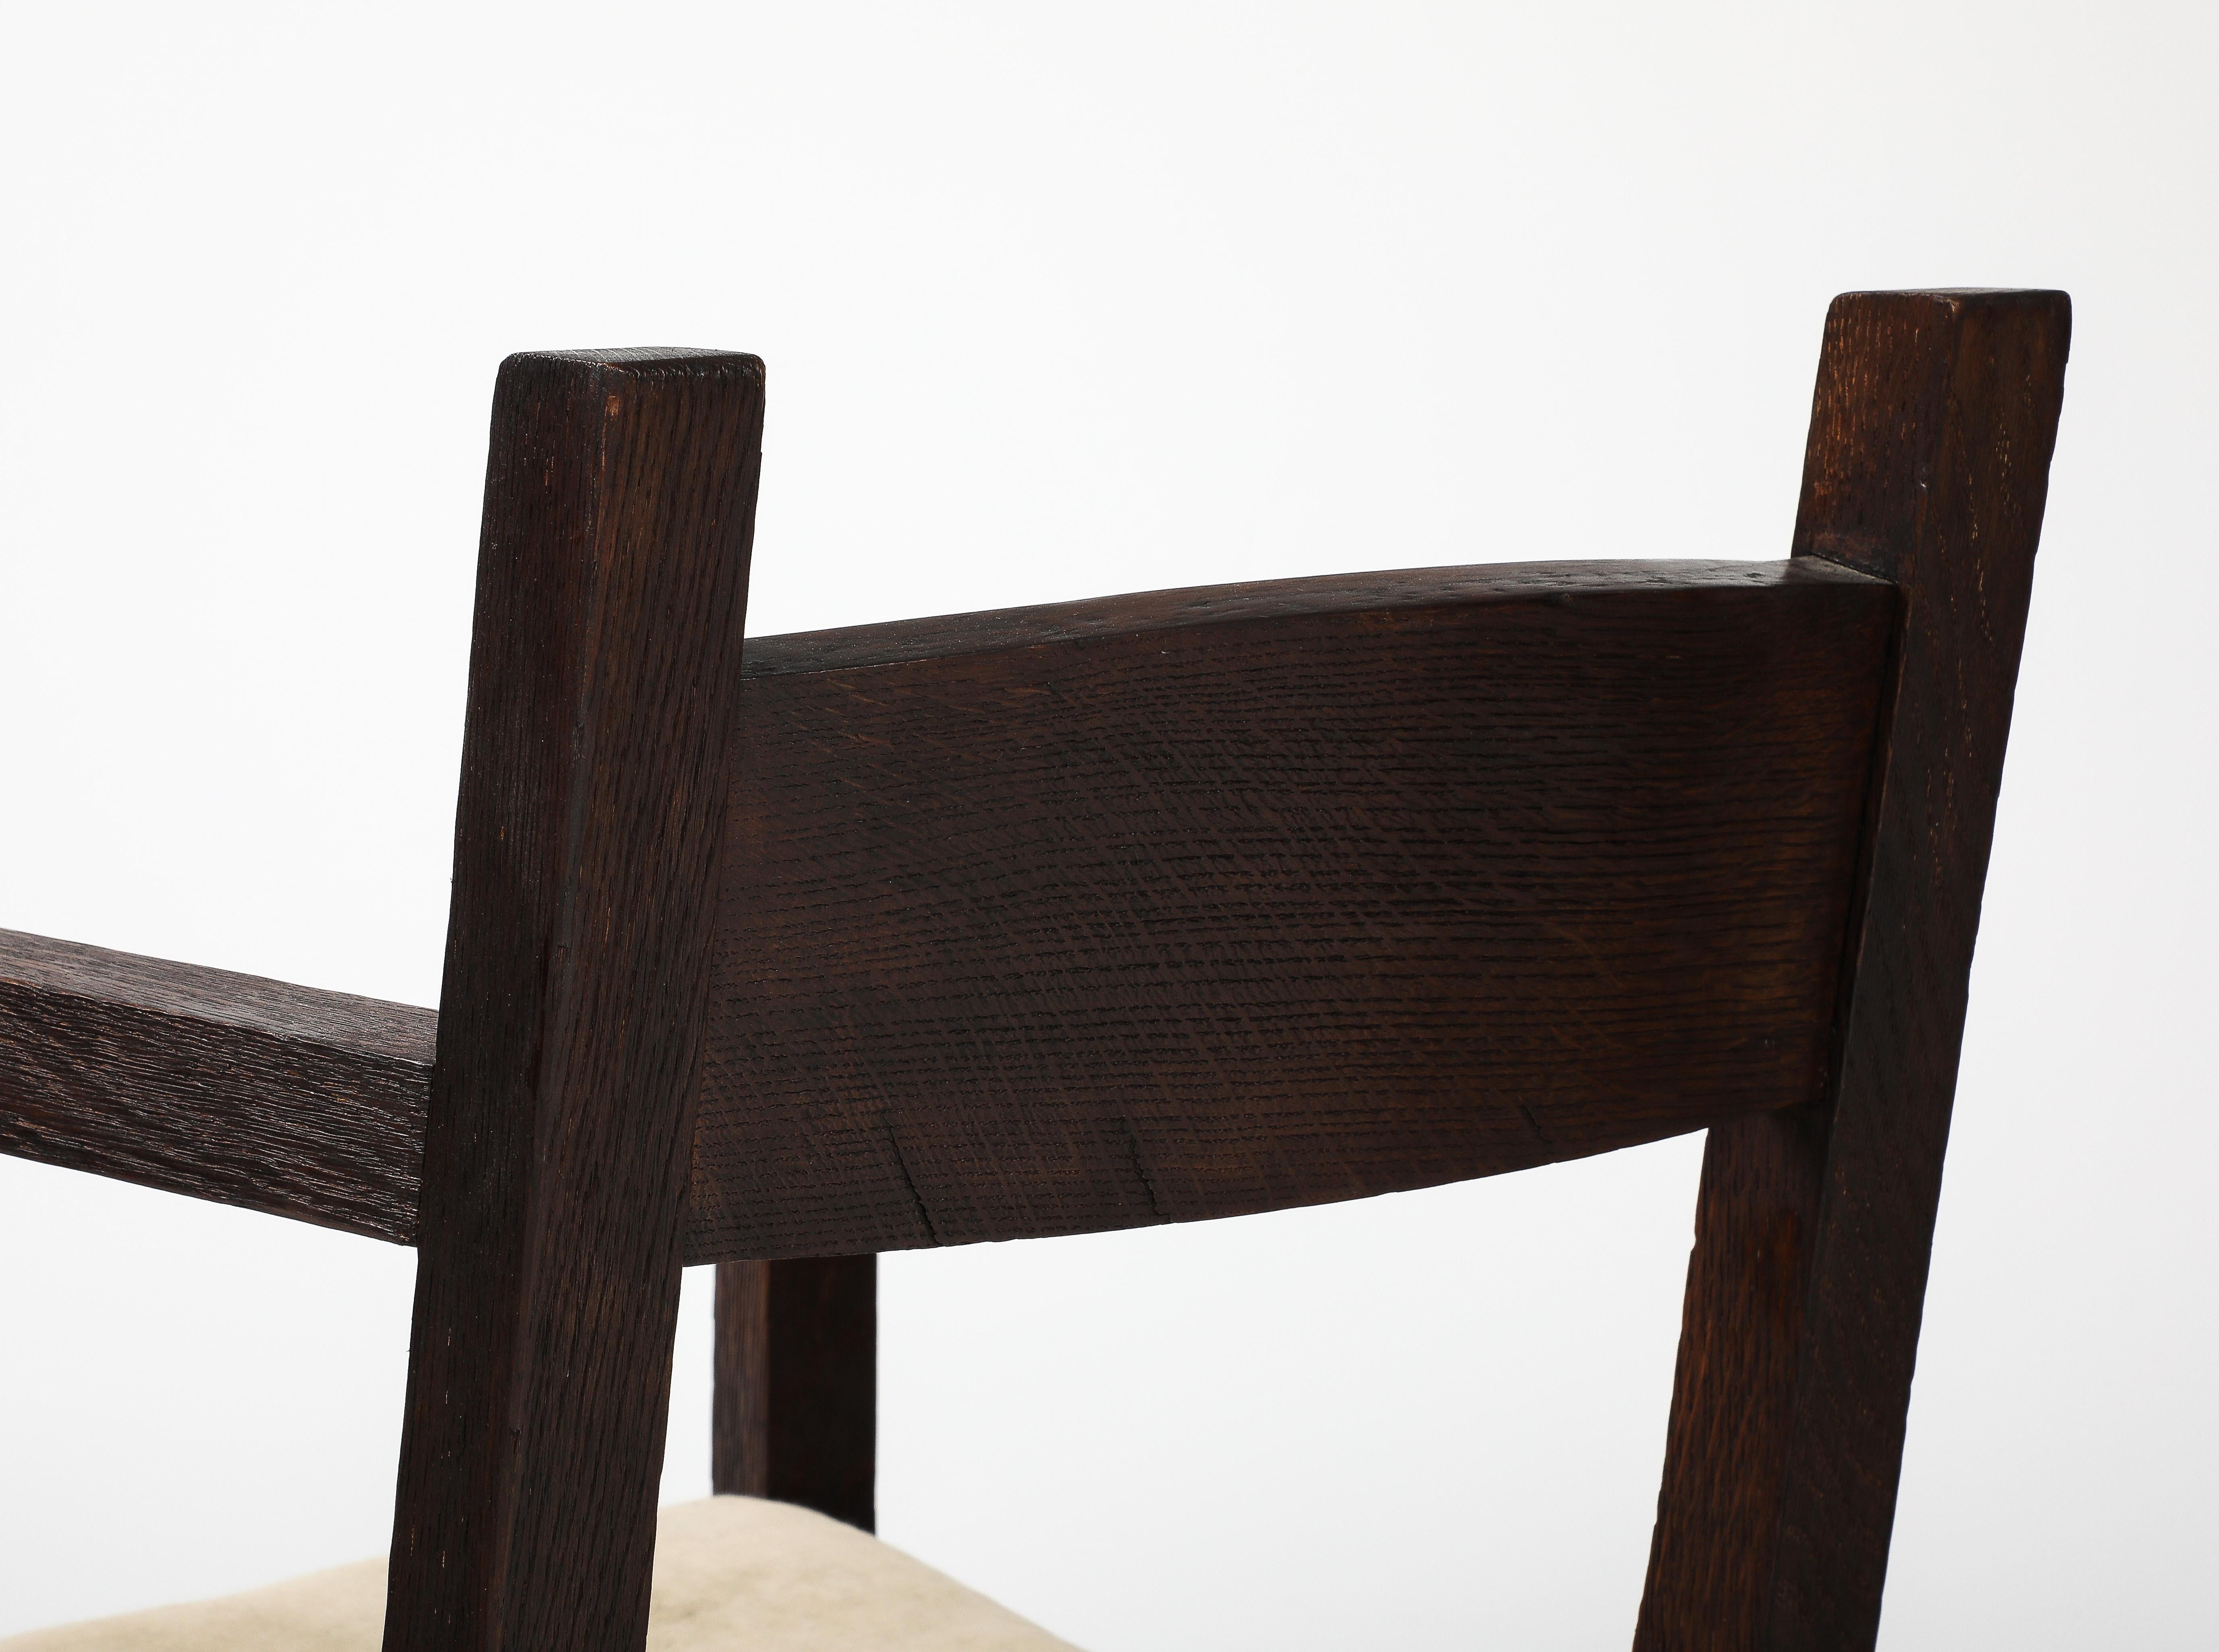 Pair of Modernist Eyre de Lanux Armchairs in Brushed Oak, France, c. 1925 For Sale 10